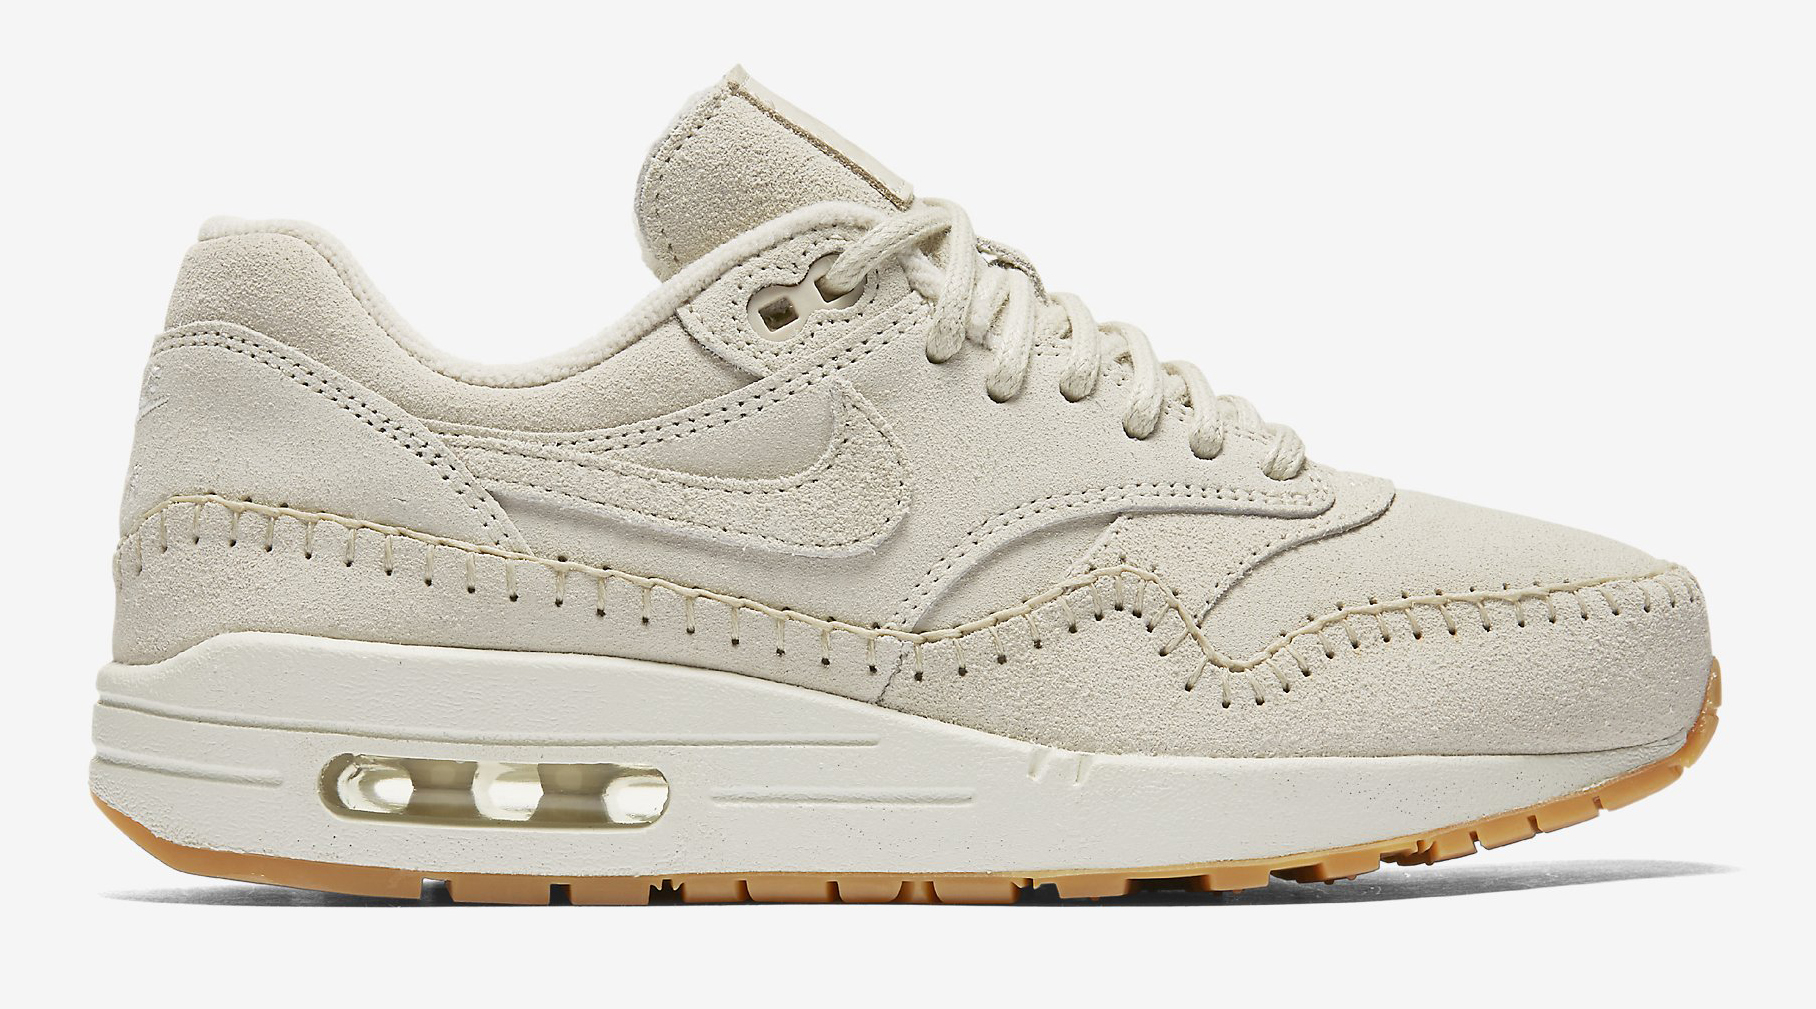 Nike Air Max 1 Sherpa Pack | Sole Collector